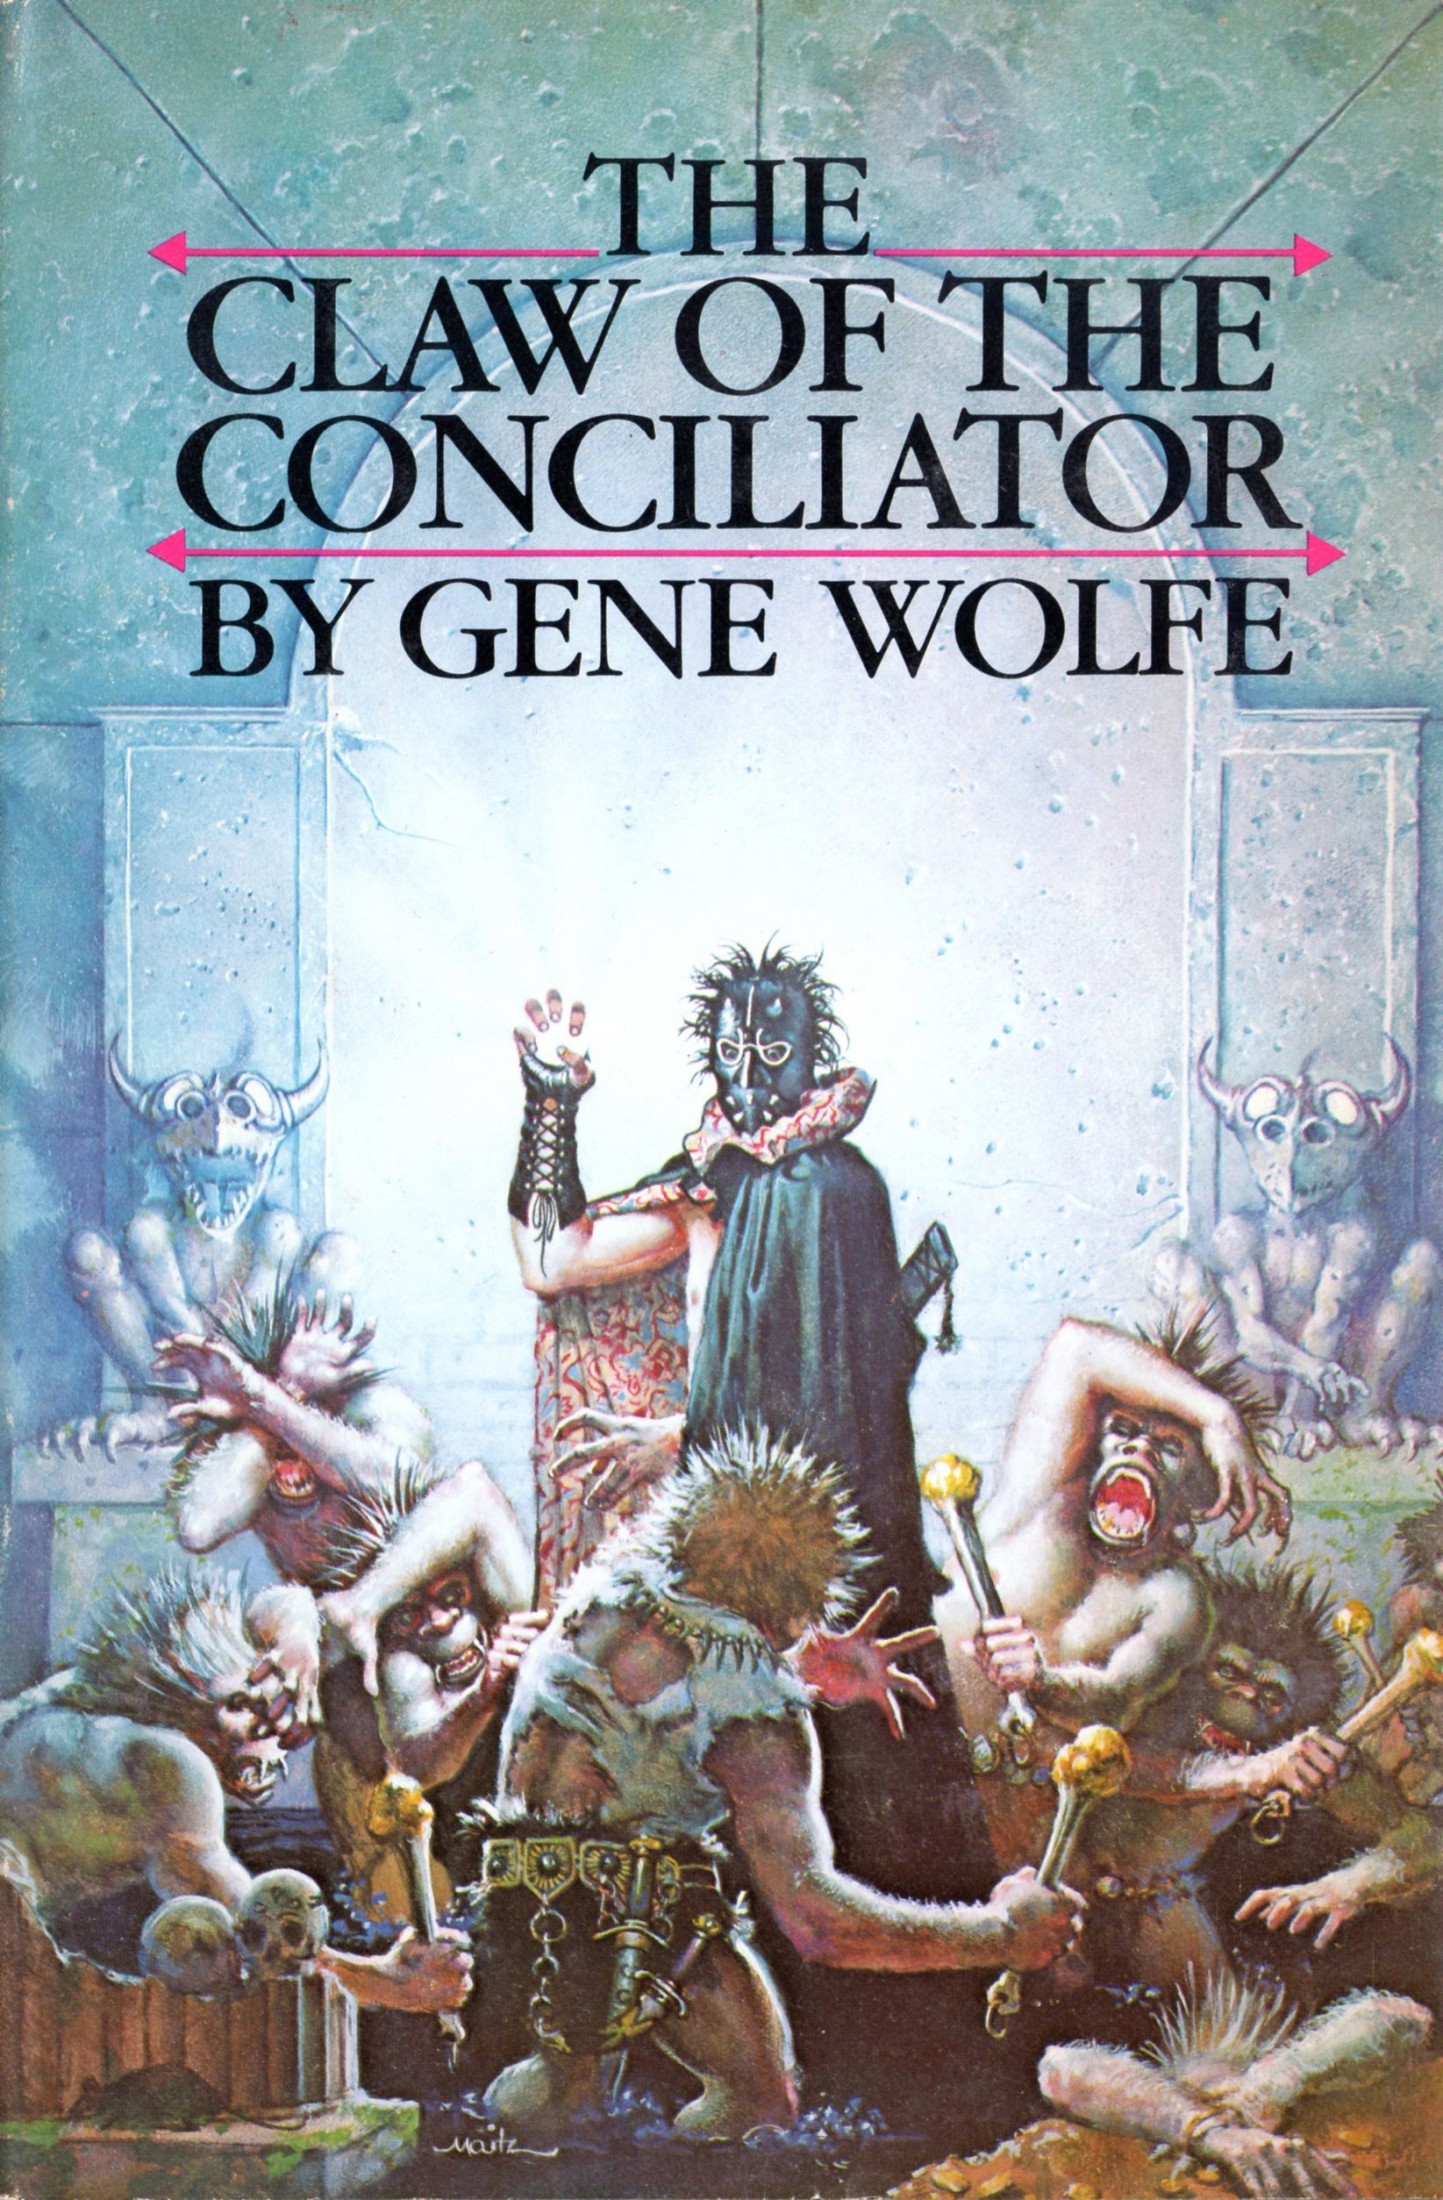 Gene Wolfe: The Claw of the Conciliator (Hardcover, 1981, Timescape Books)